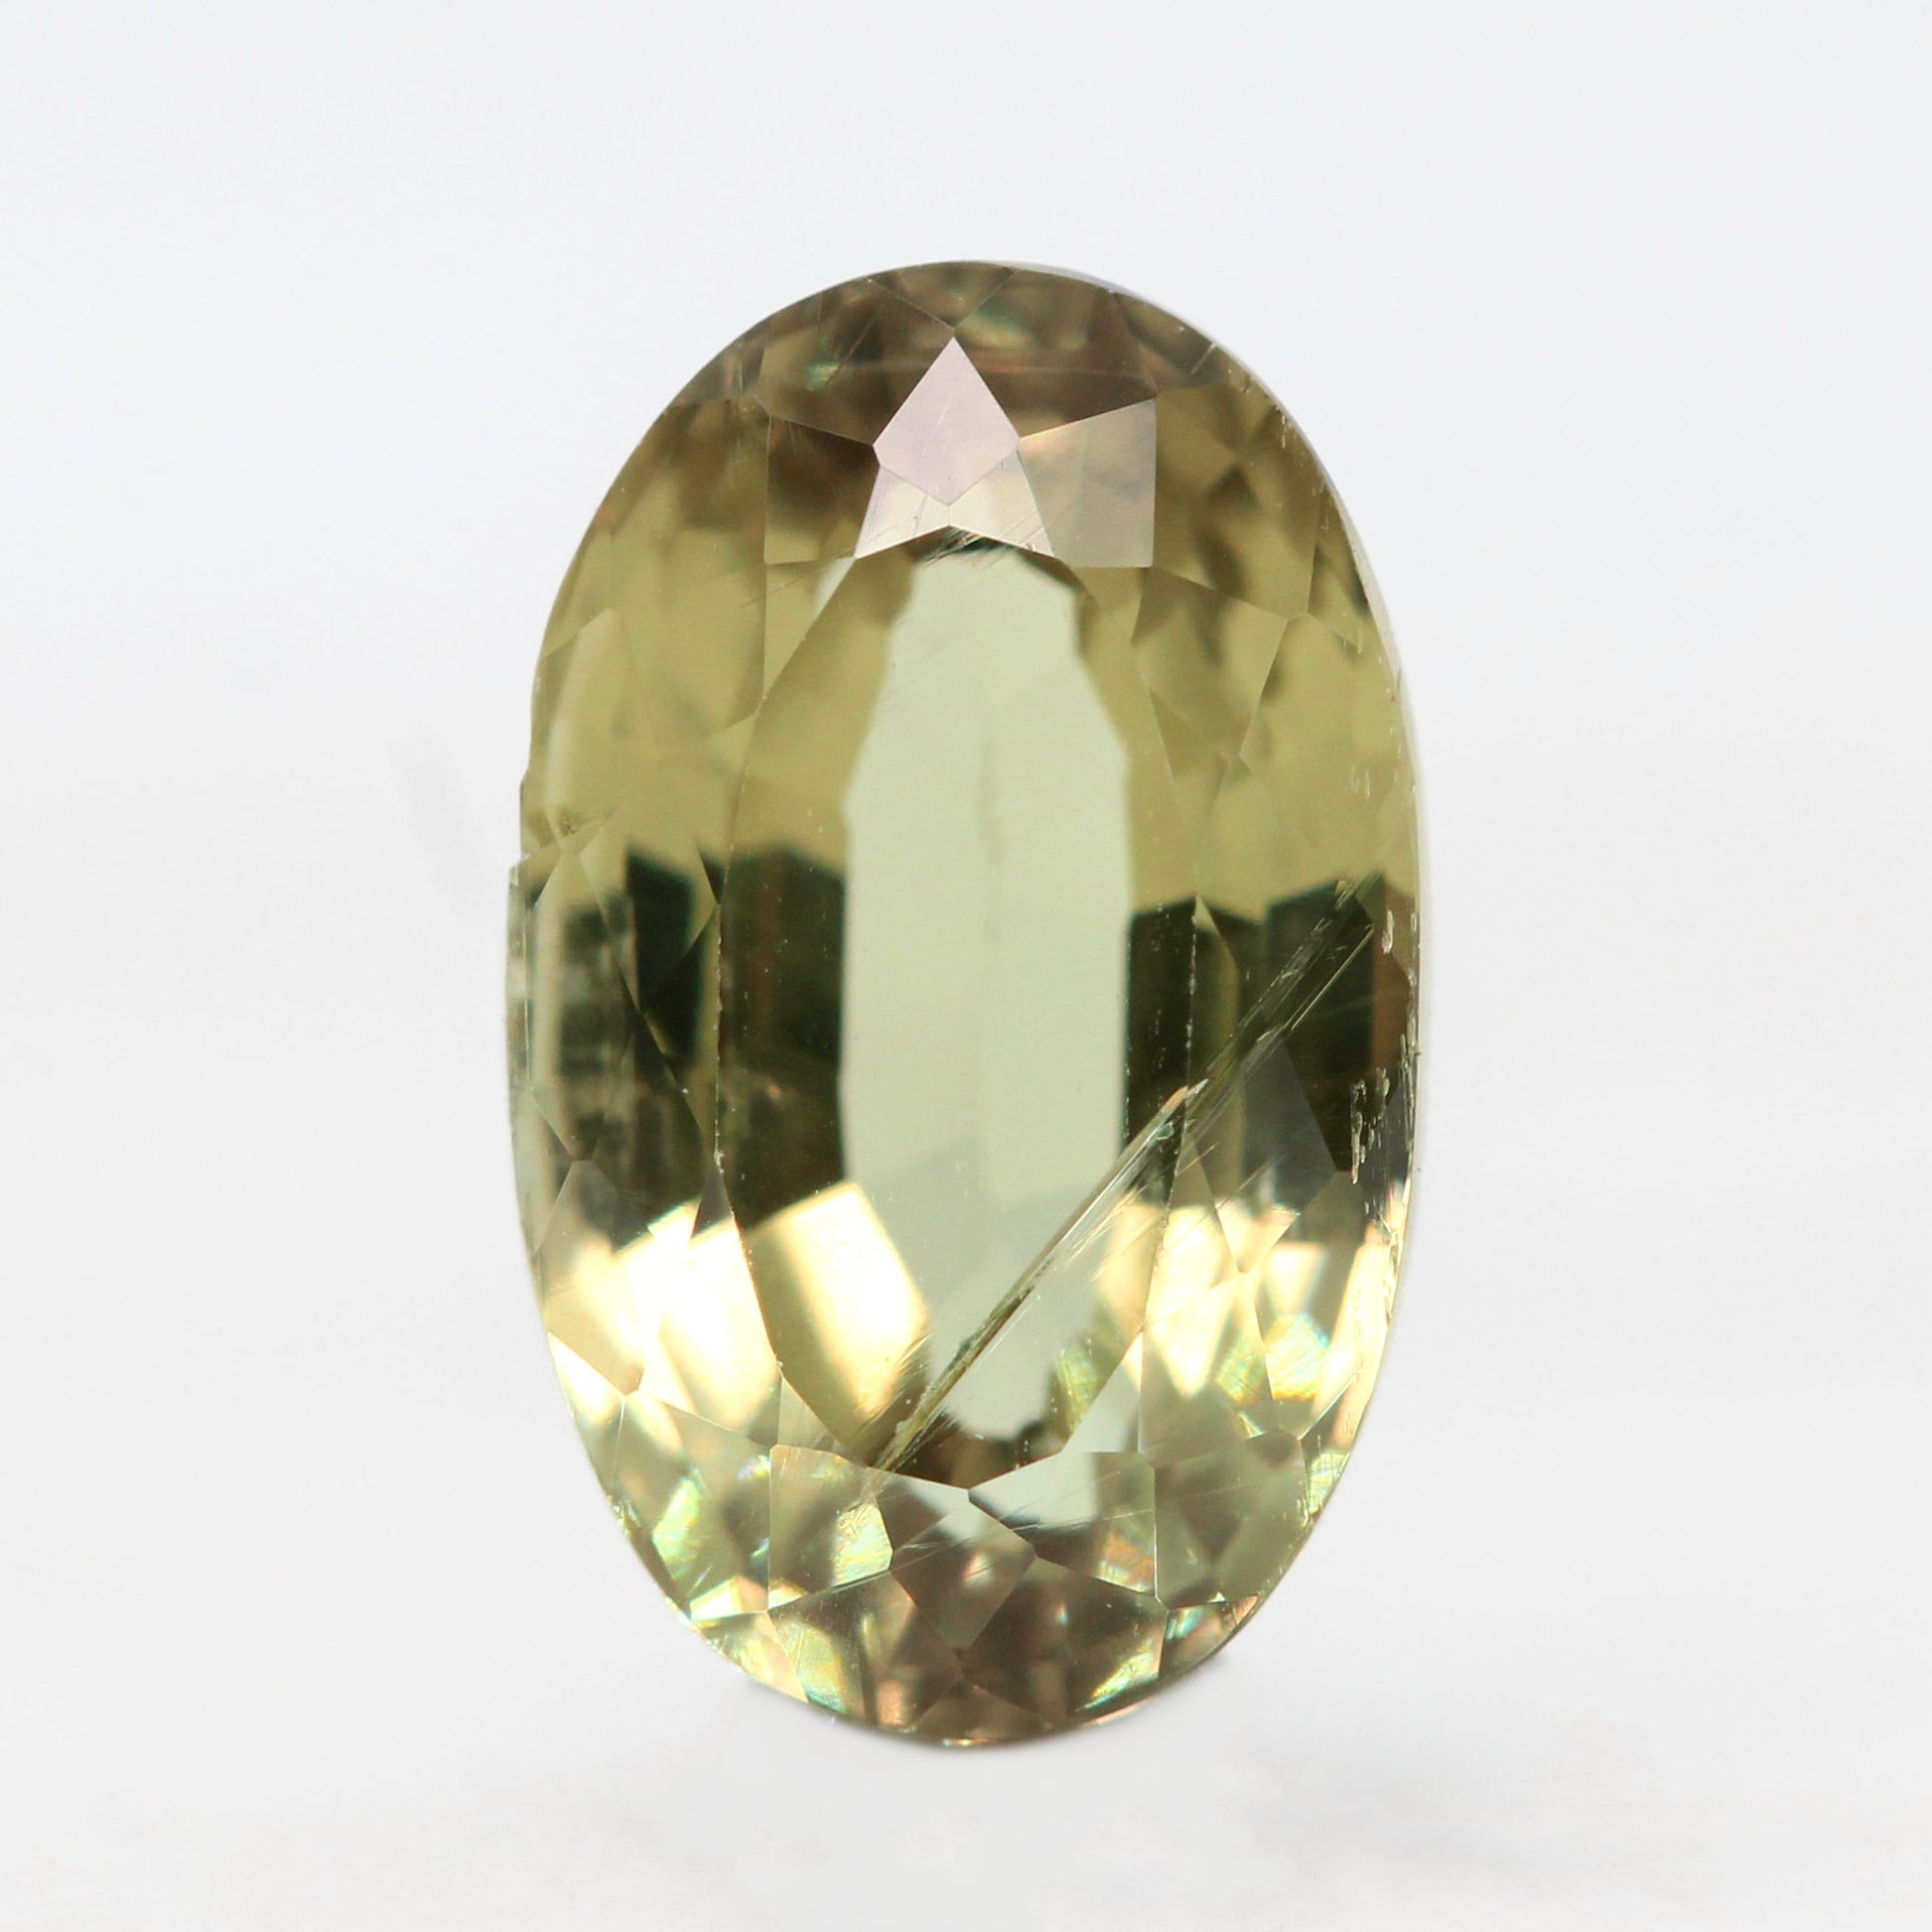 3.40 Carat Yellow-Green Oval Sapphire for Custom Work - Inventory Code YGOS340 - Midwinter Co. Alternative Bridal Rings and Modern Fine Jewelry